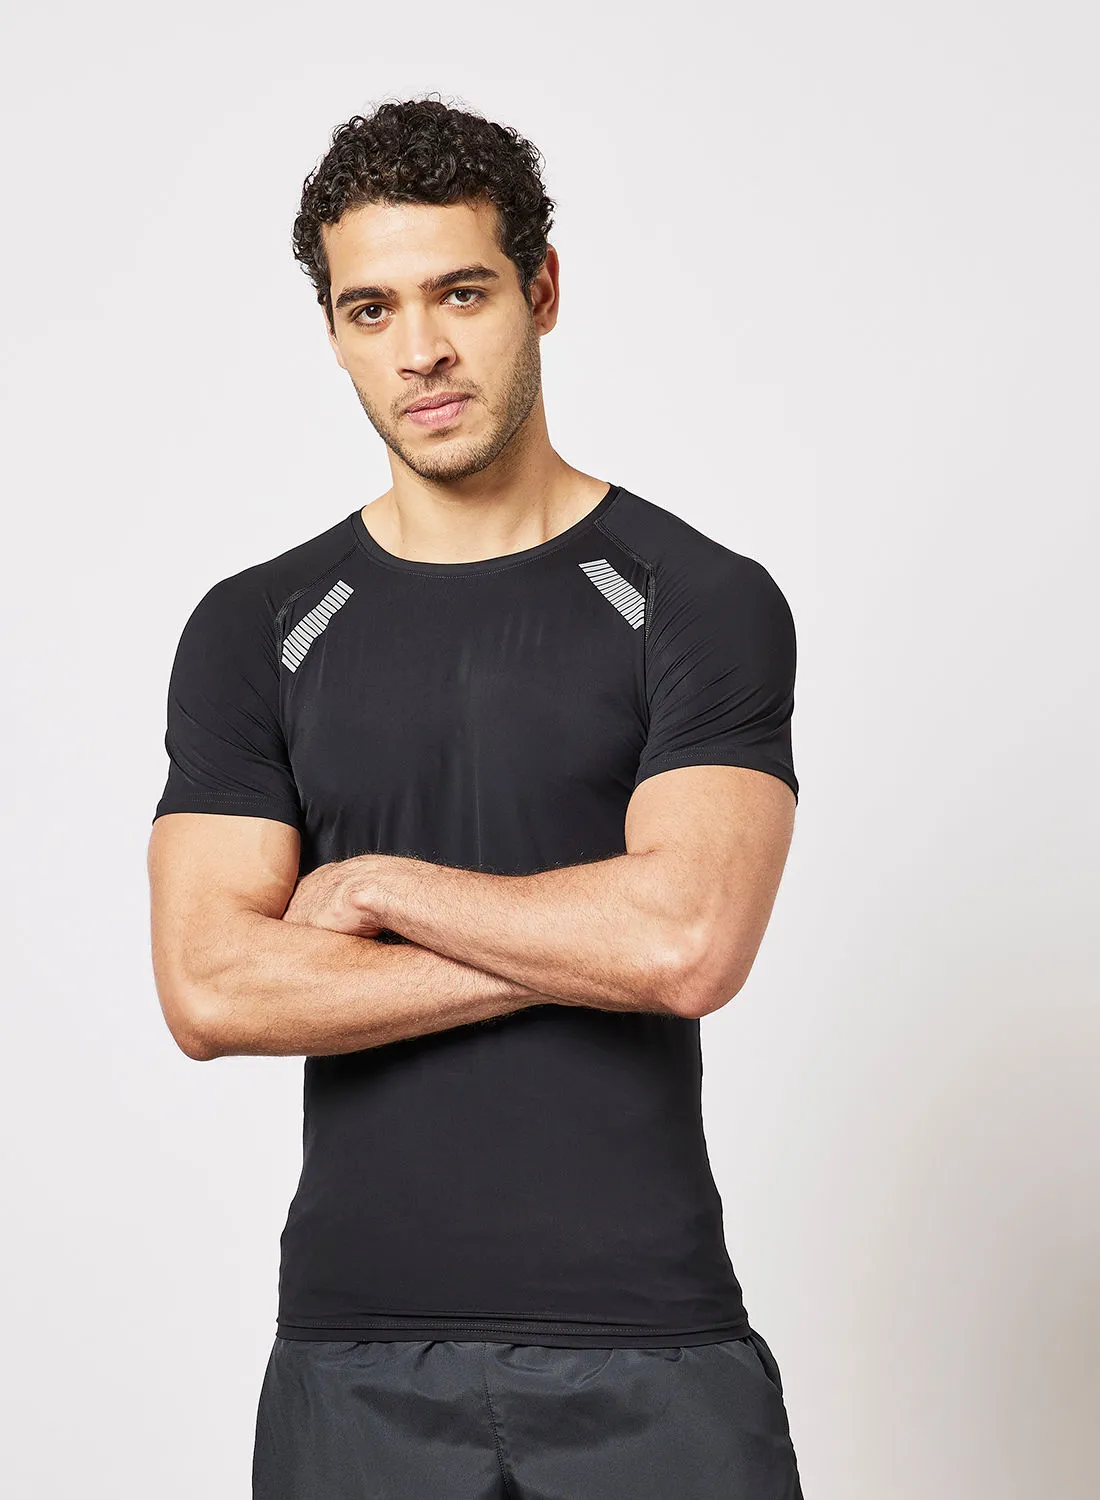 STATE 8 Active Sports T-Shirt Black